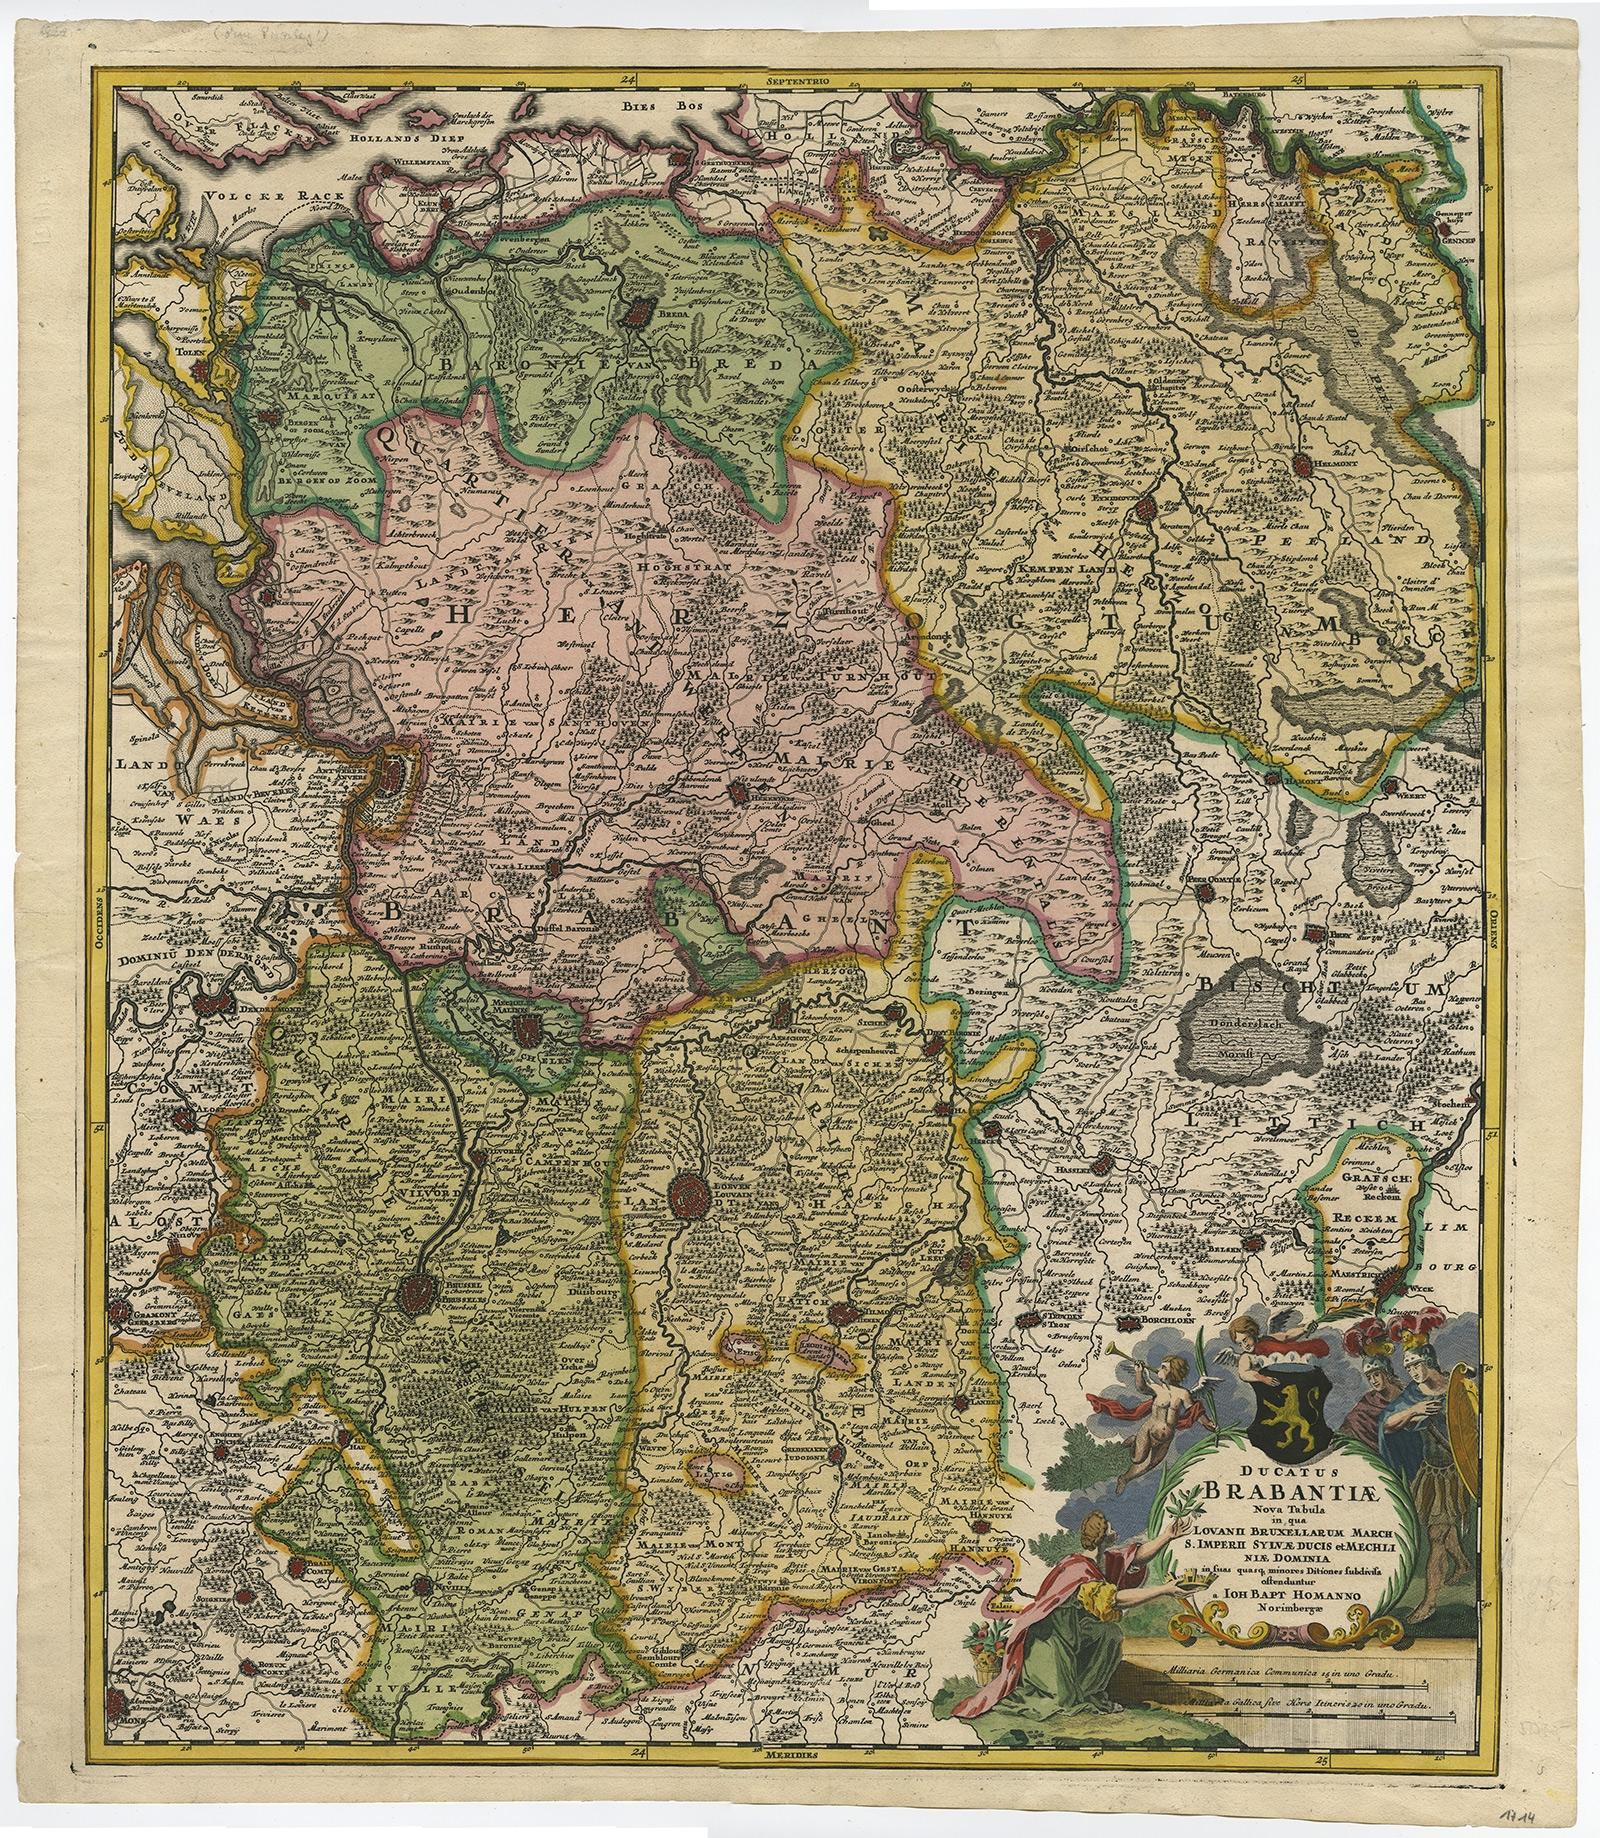 Antique map titled 'Ducatus Brabantiae Nova Tabula in qua Lovanii Bruxellarum March S. Impreii Sylvae Ducis et Merchliniae Dominia.' 

This fully engraved copperplate map covers important Duchy of Brabant and is centered on the large fortress of